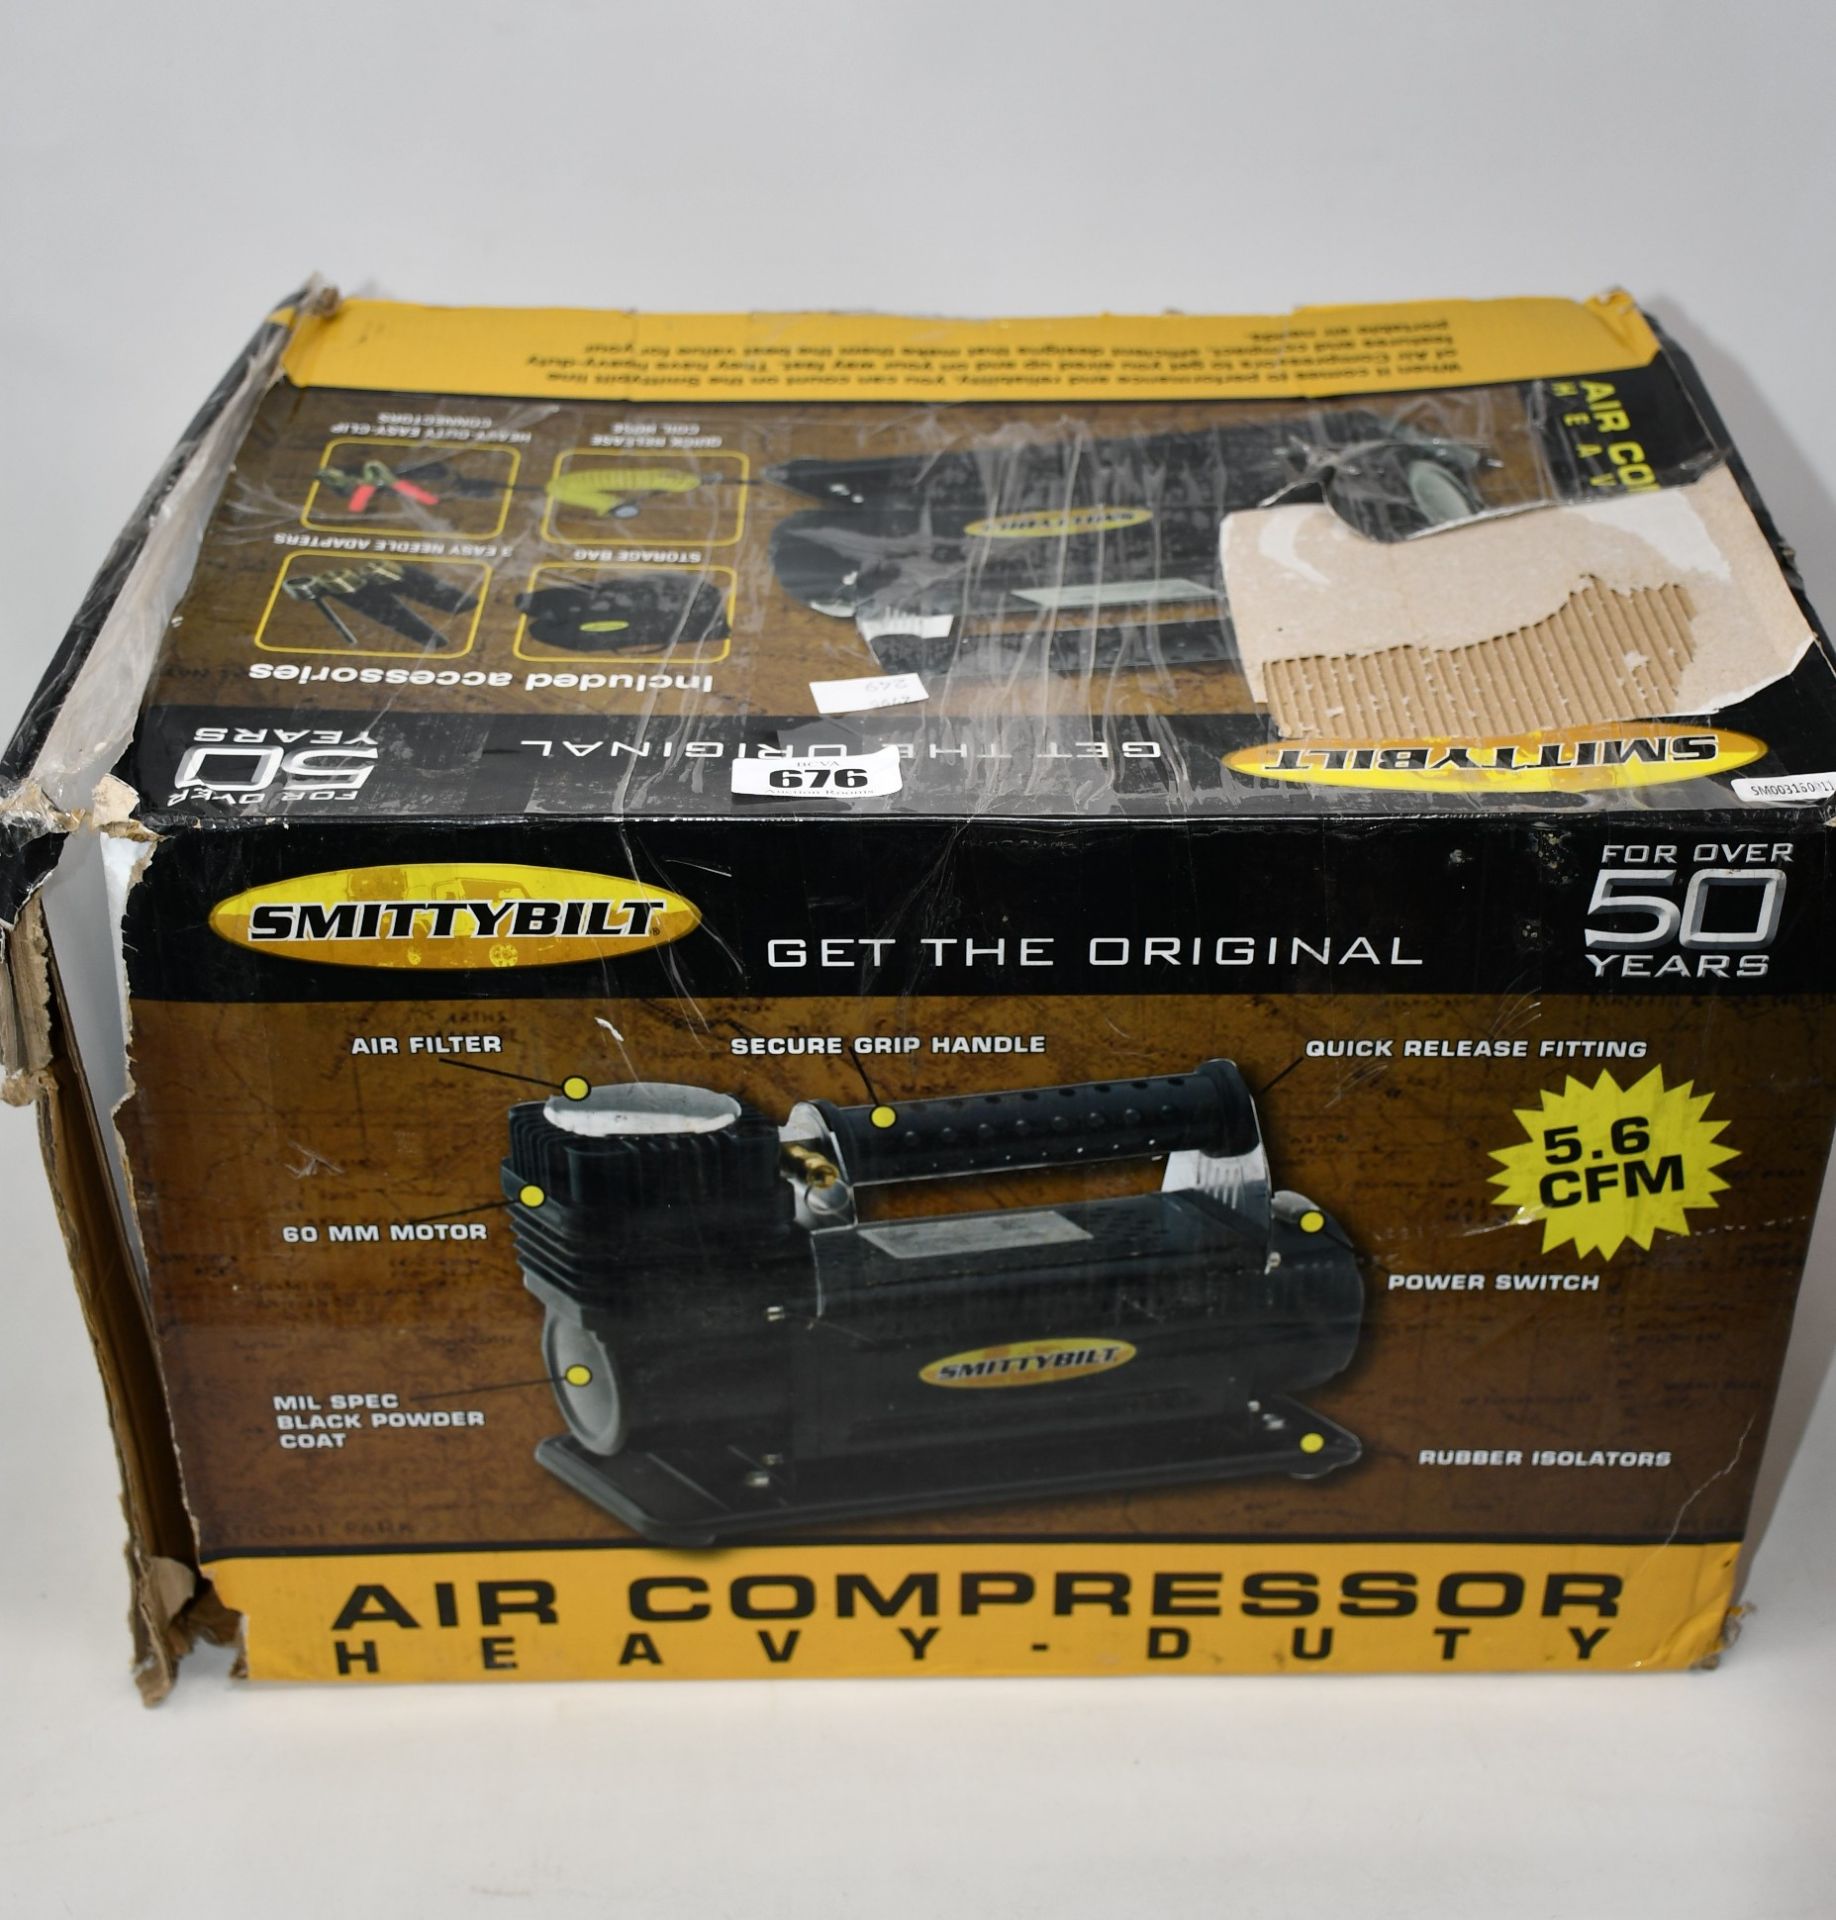 One boxed as new Smittybilt high performance air compressor (Model: 2781).